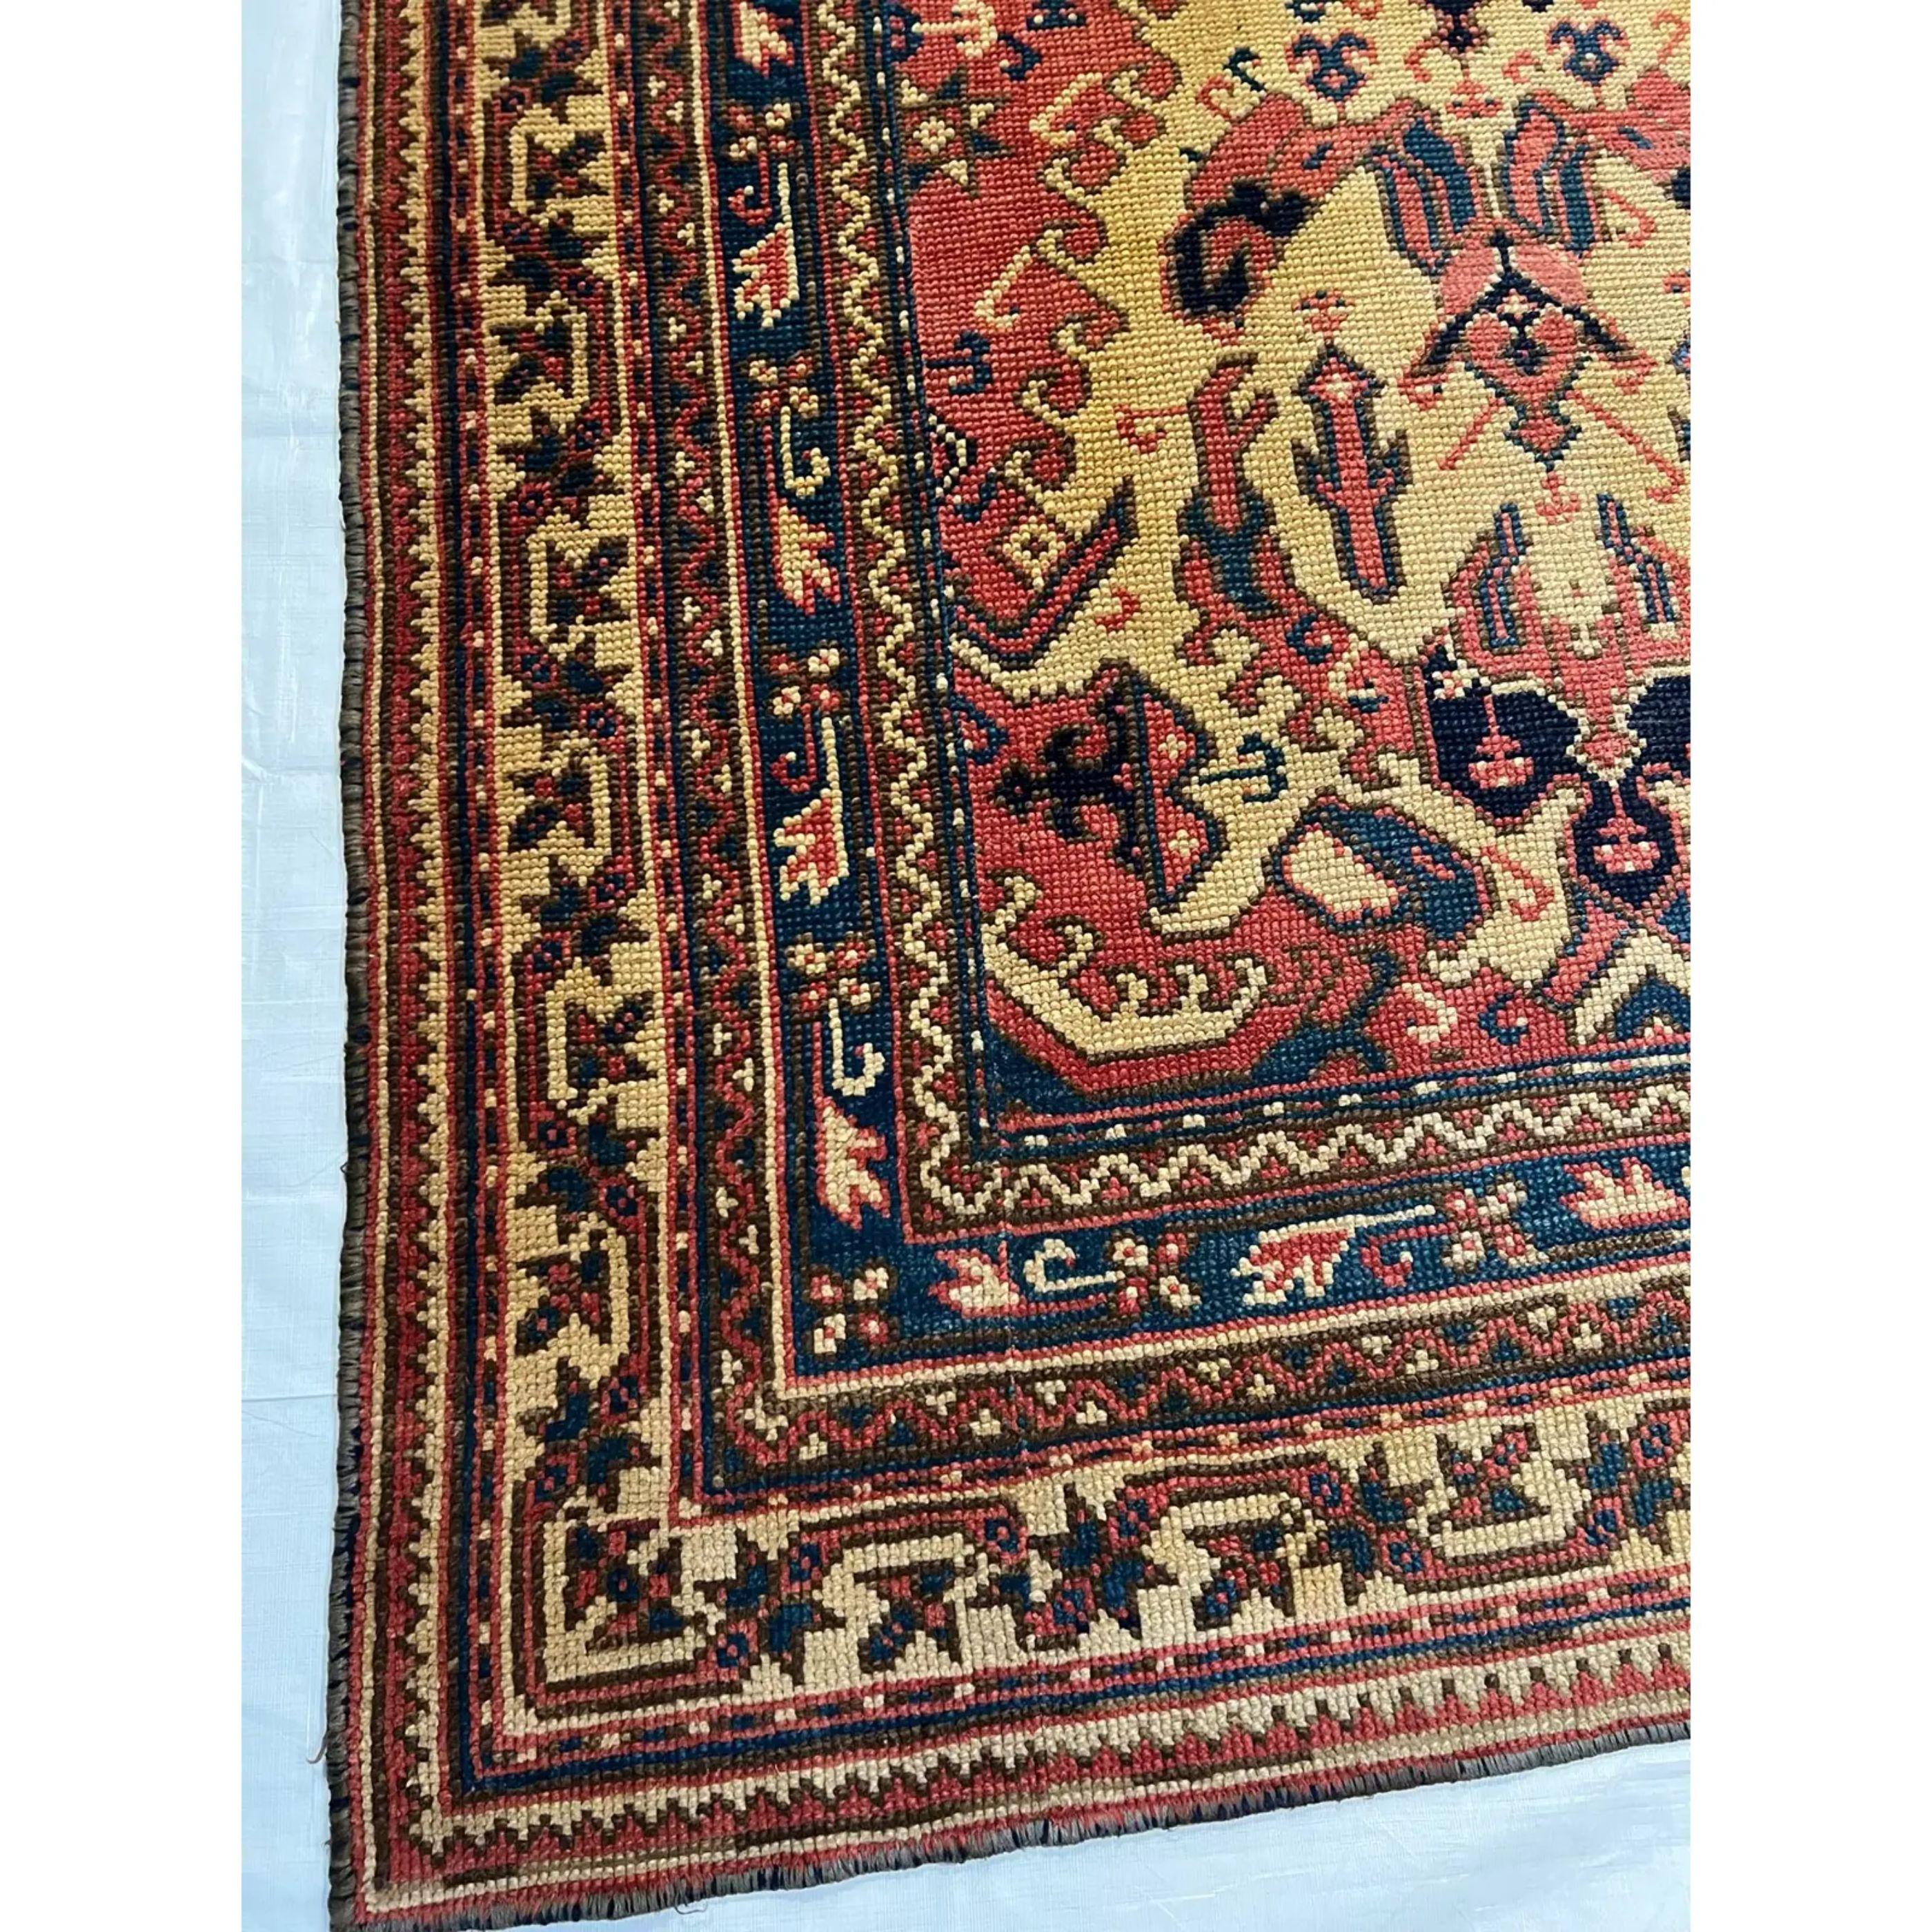 Antique Turkish Oushak rugs have been woven in Western Turkey since the beginning of the Ottoman period. Historians attributed to them many of the great masterpieces of early Turkish carpet weaving from the 15th to the 17th centuries. However, less